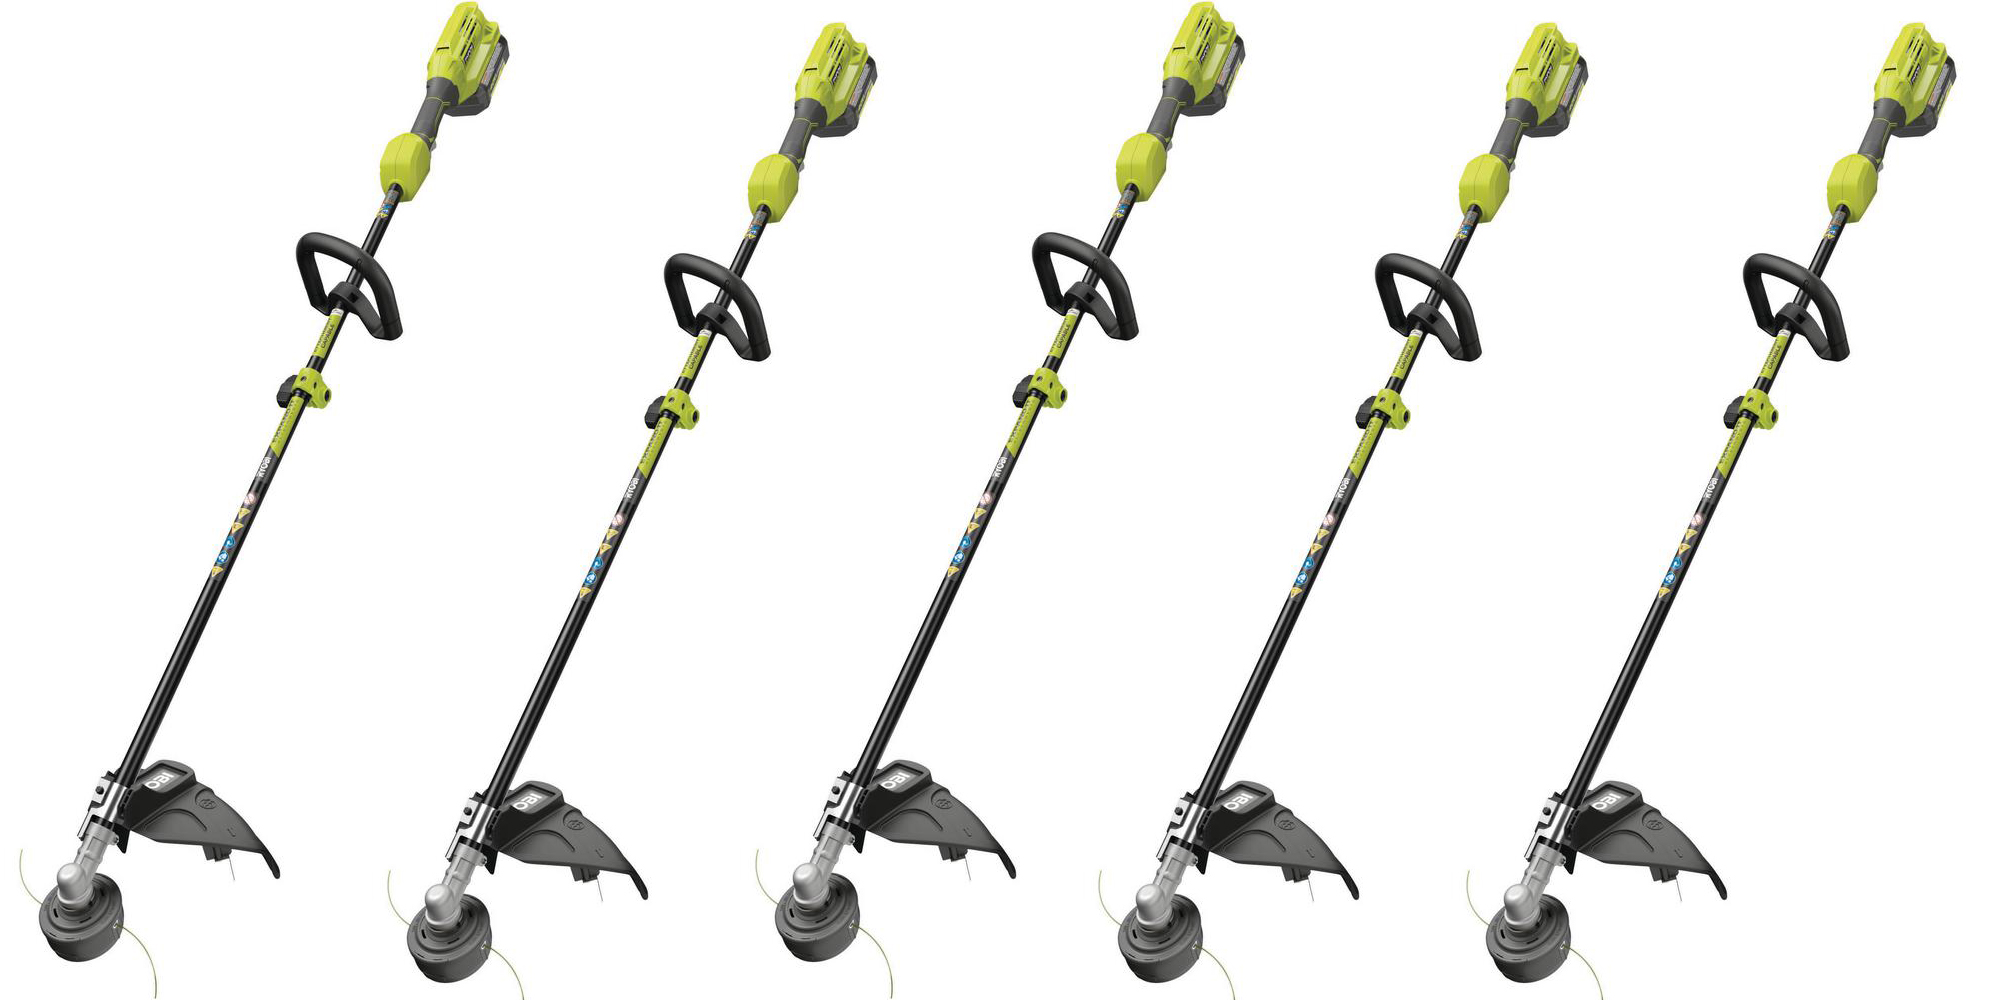 Score a Ryobi 40V Electric String Trimmer for $129 (Reg. $150+), more in today’s best Green Deals